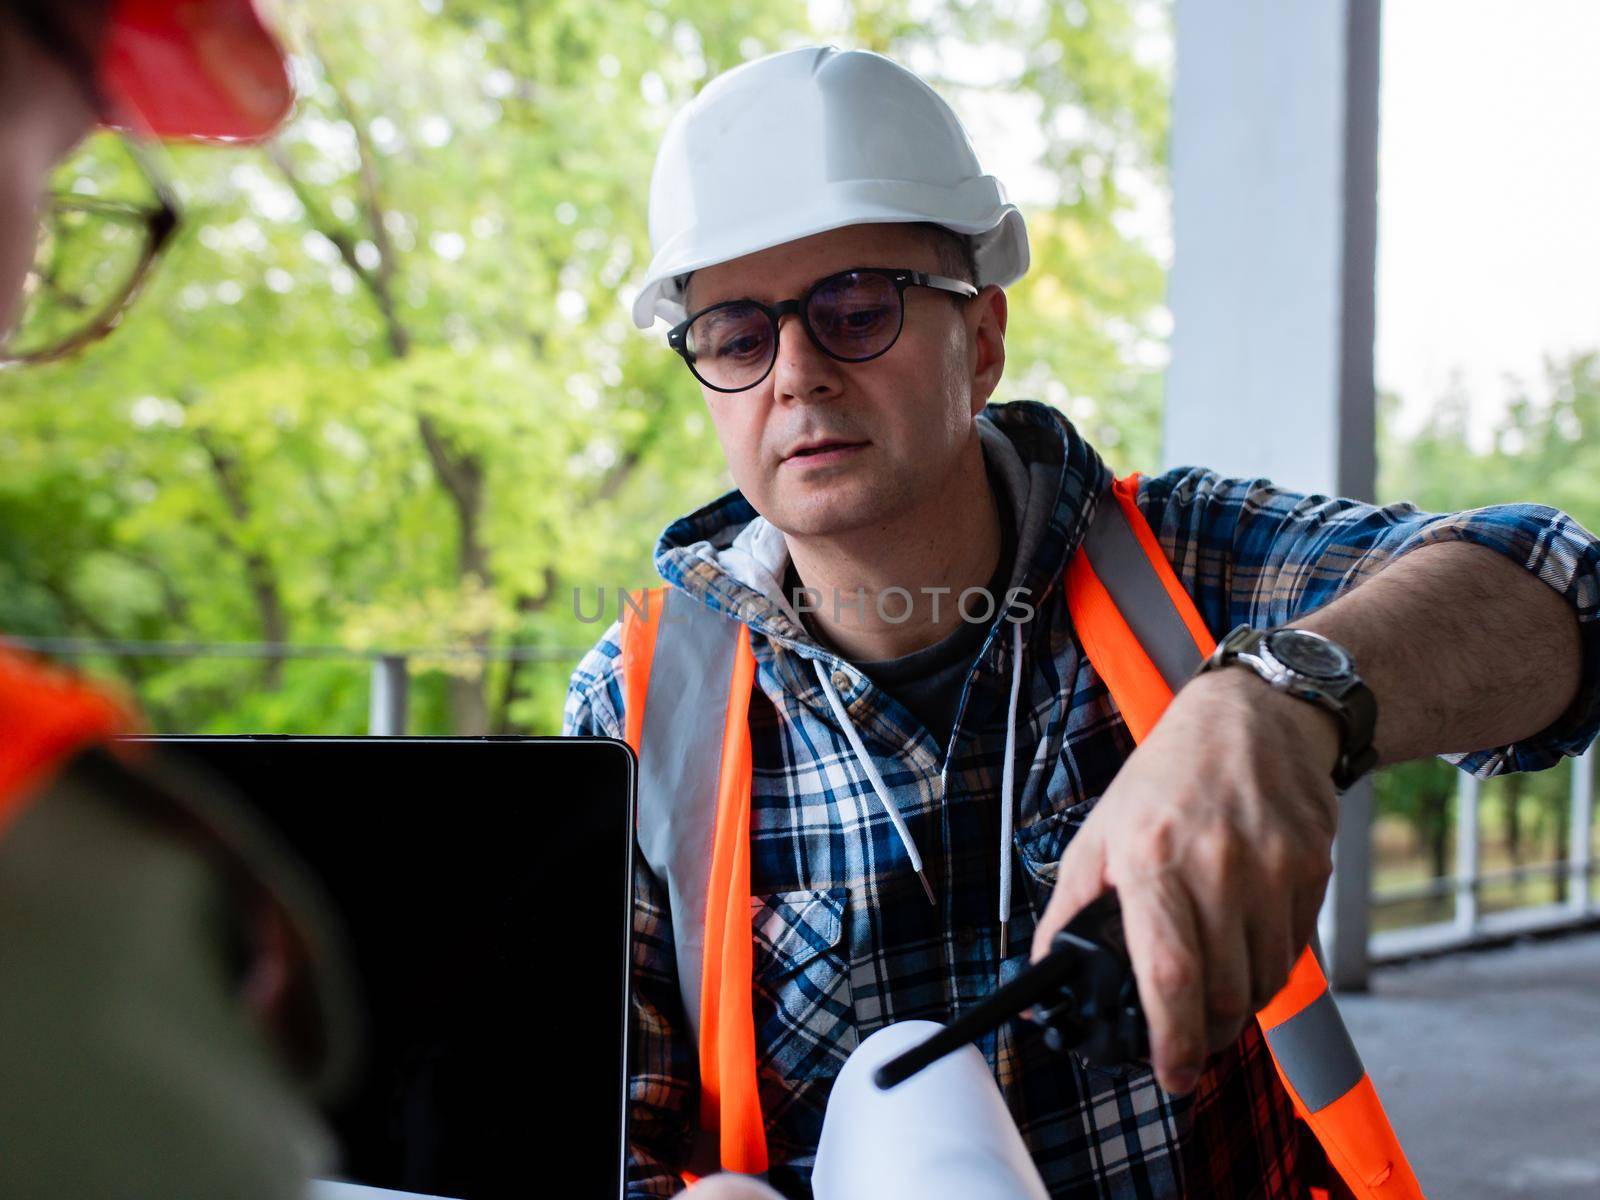 Construction management. A male manager at a construction site is discussing a building construction plan. The man is holding a walkie-talkie in his hand. by Utlanov